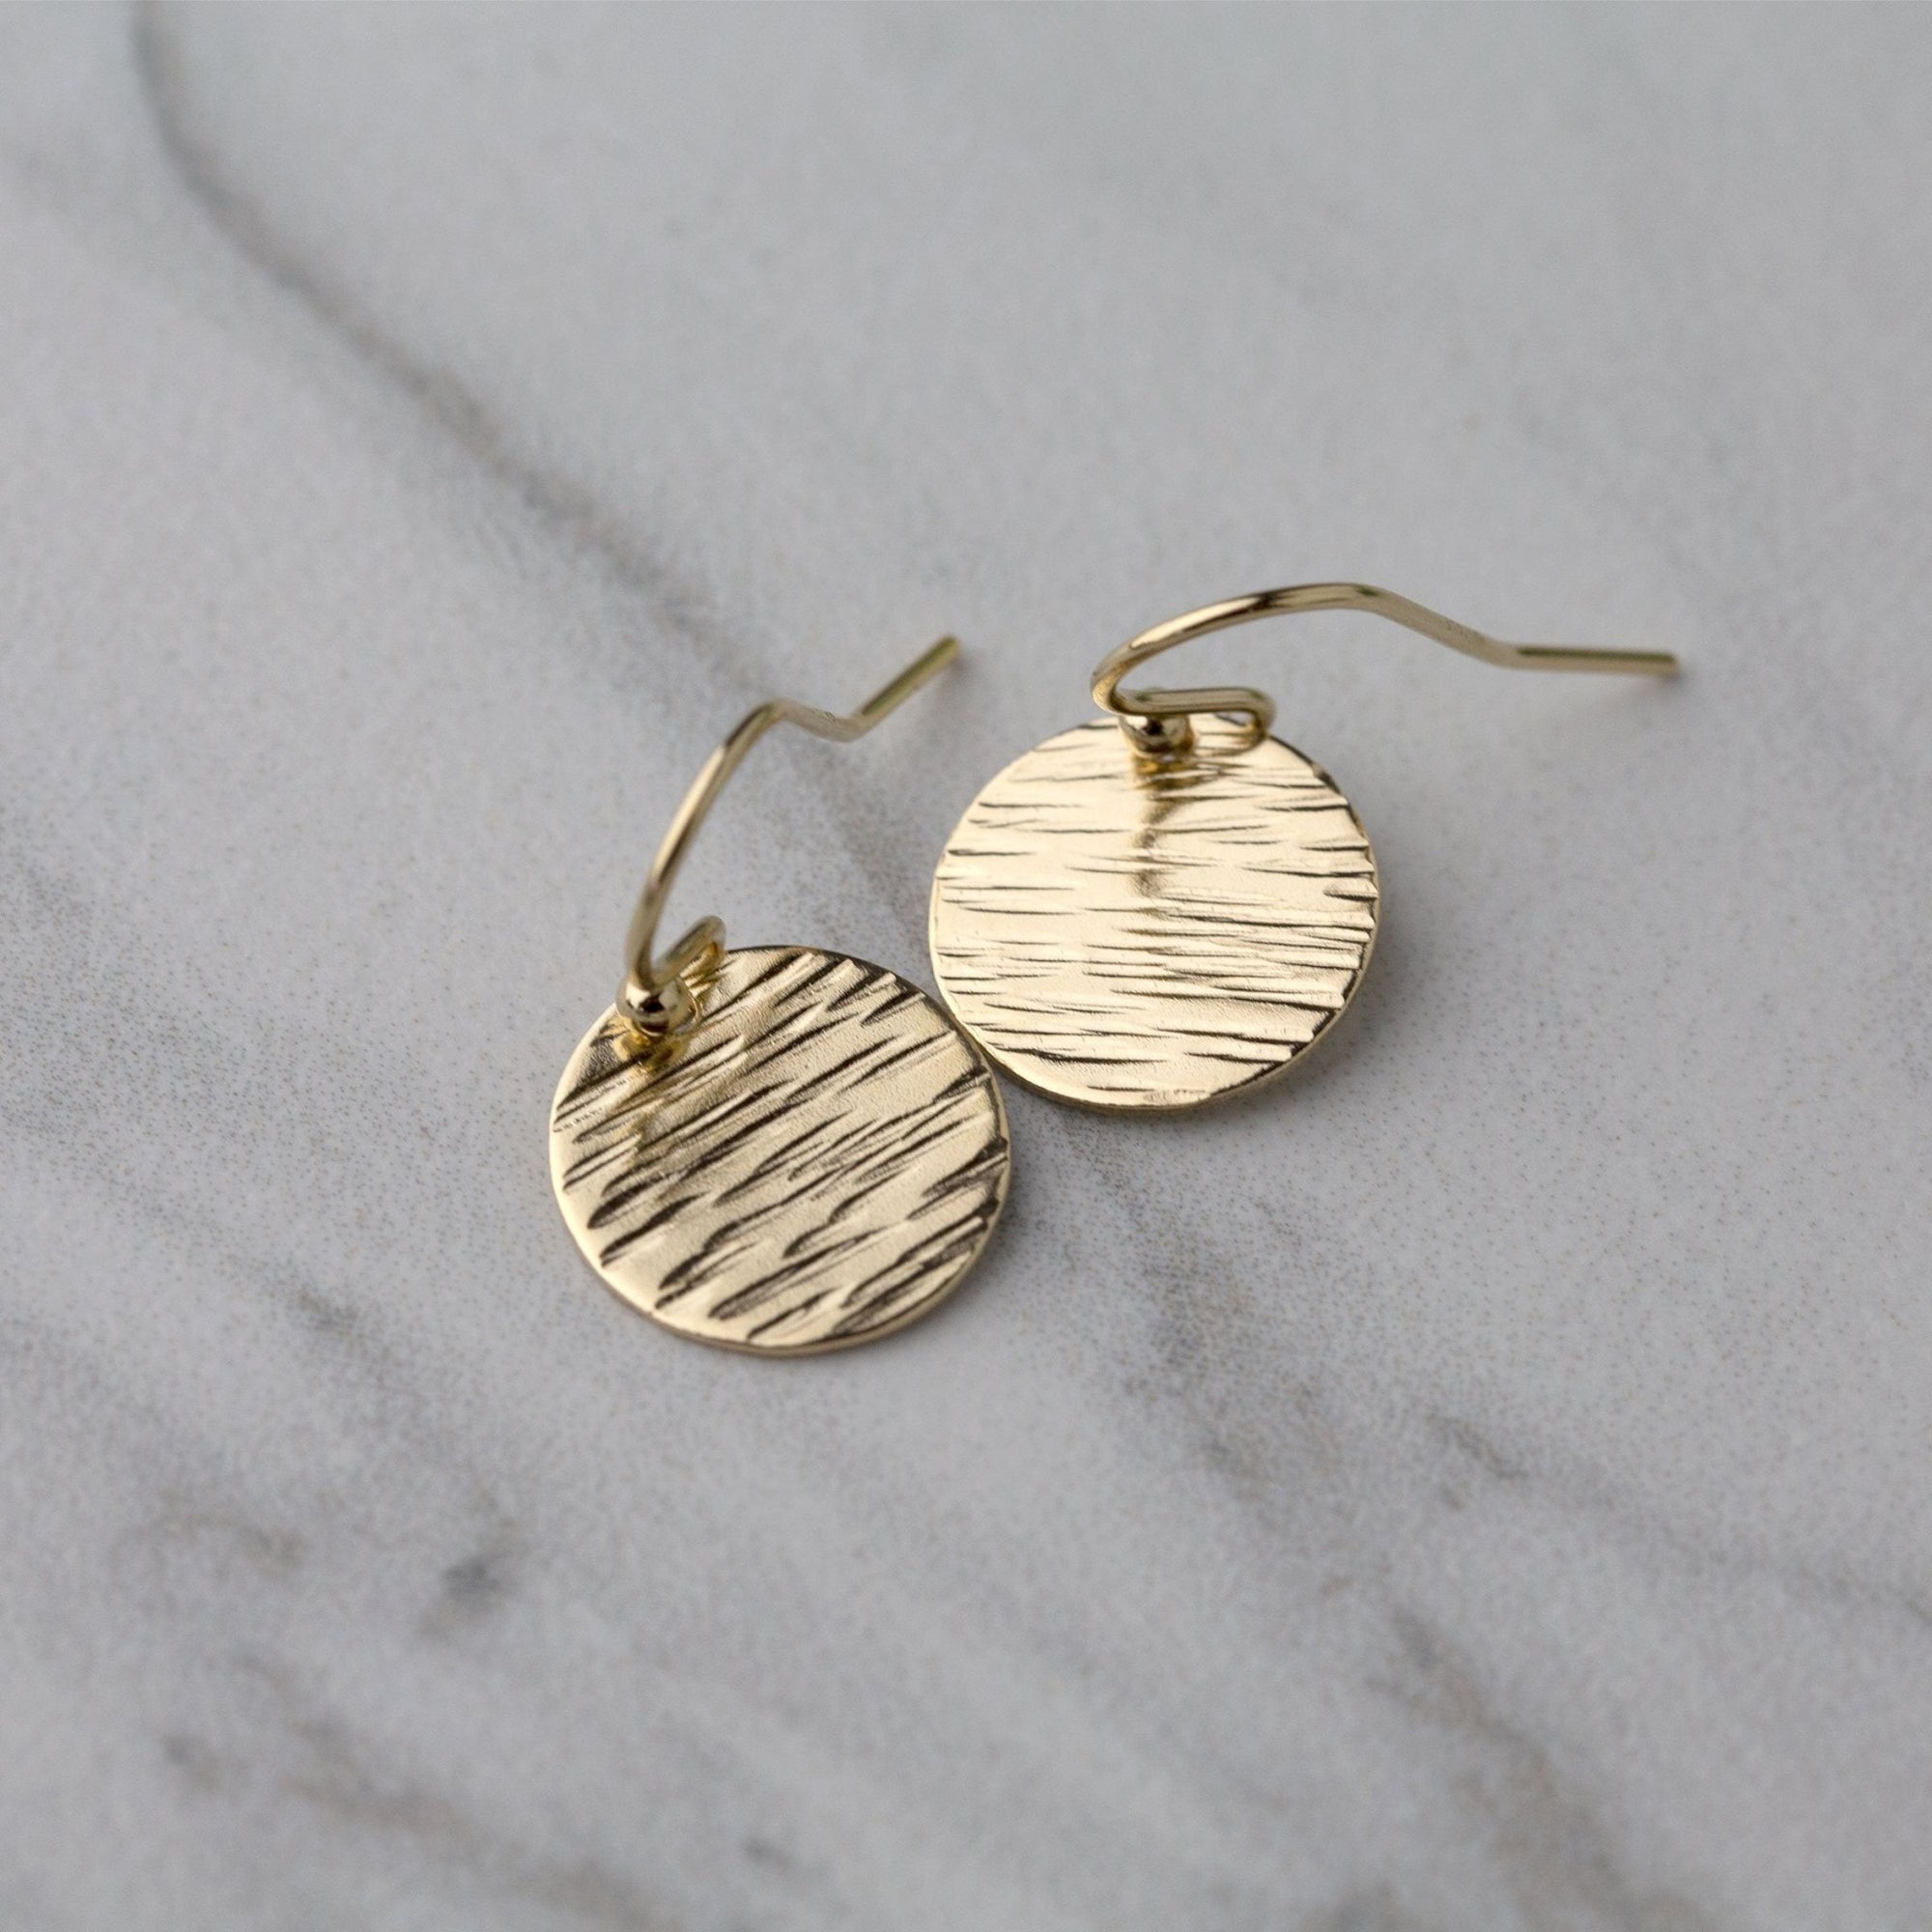 Bark Texture Gold Disk Earrings - Handmade Jewelry by Burnish